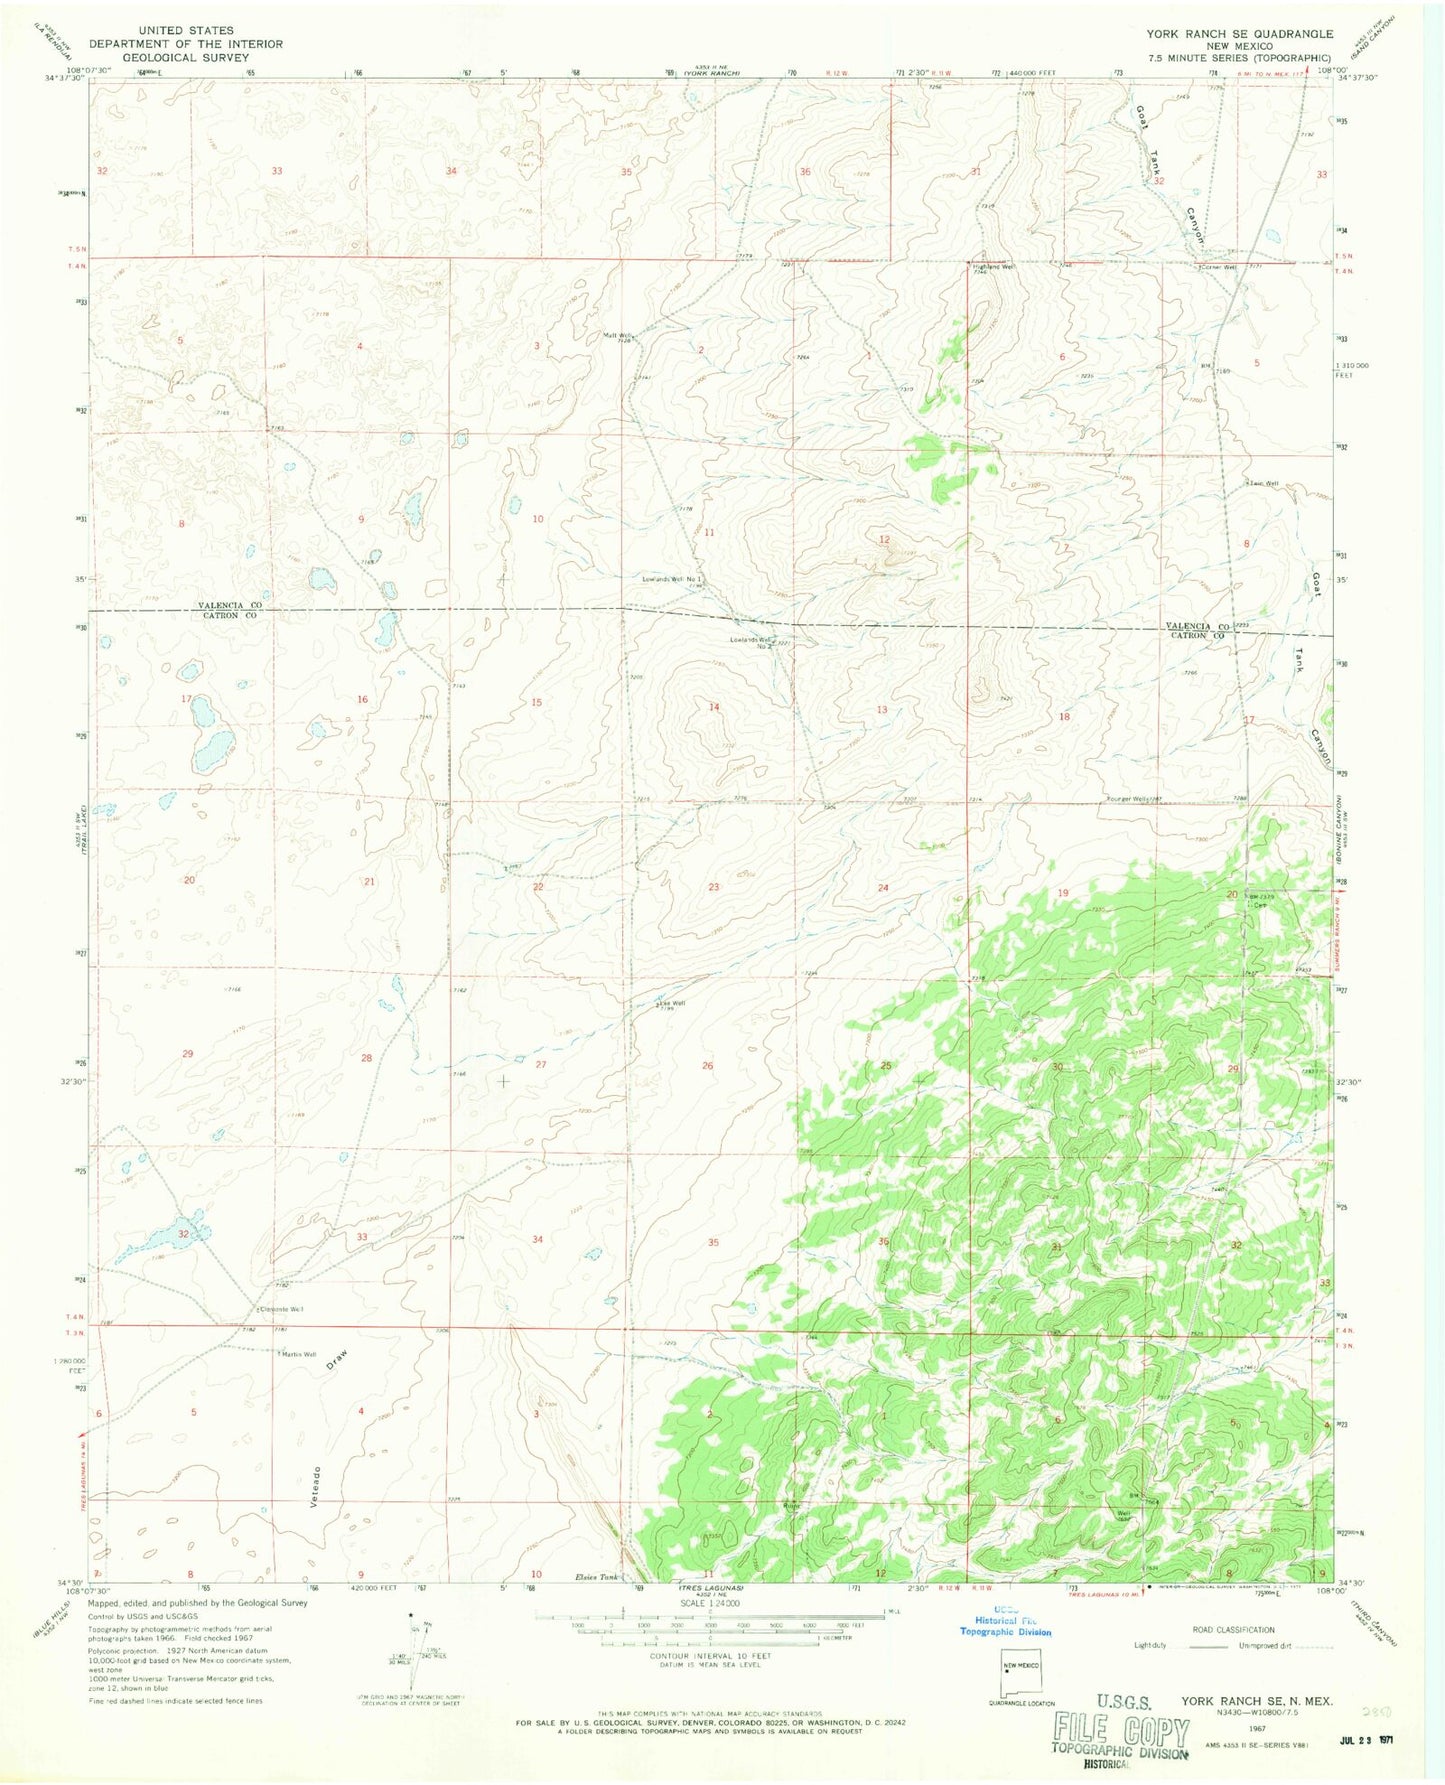 Classic USGS York Ranch SE New Mexico 7.5'x7.5' Topo Map Image